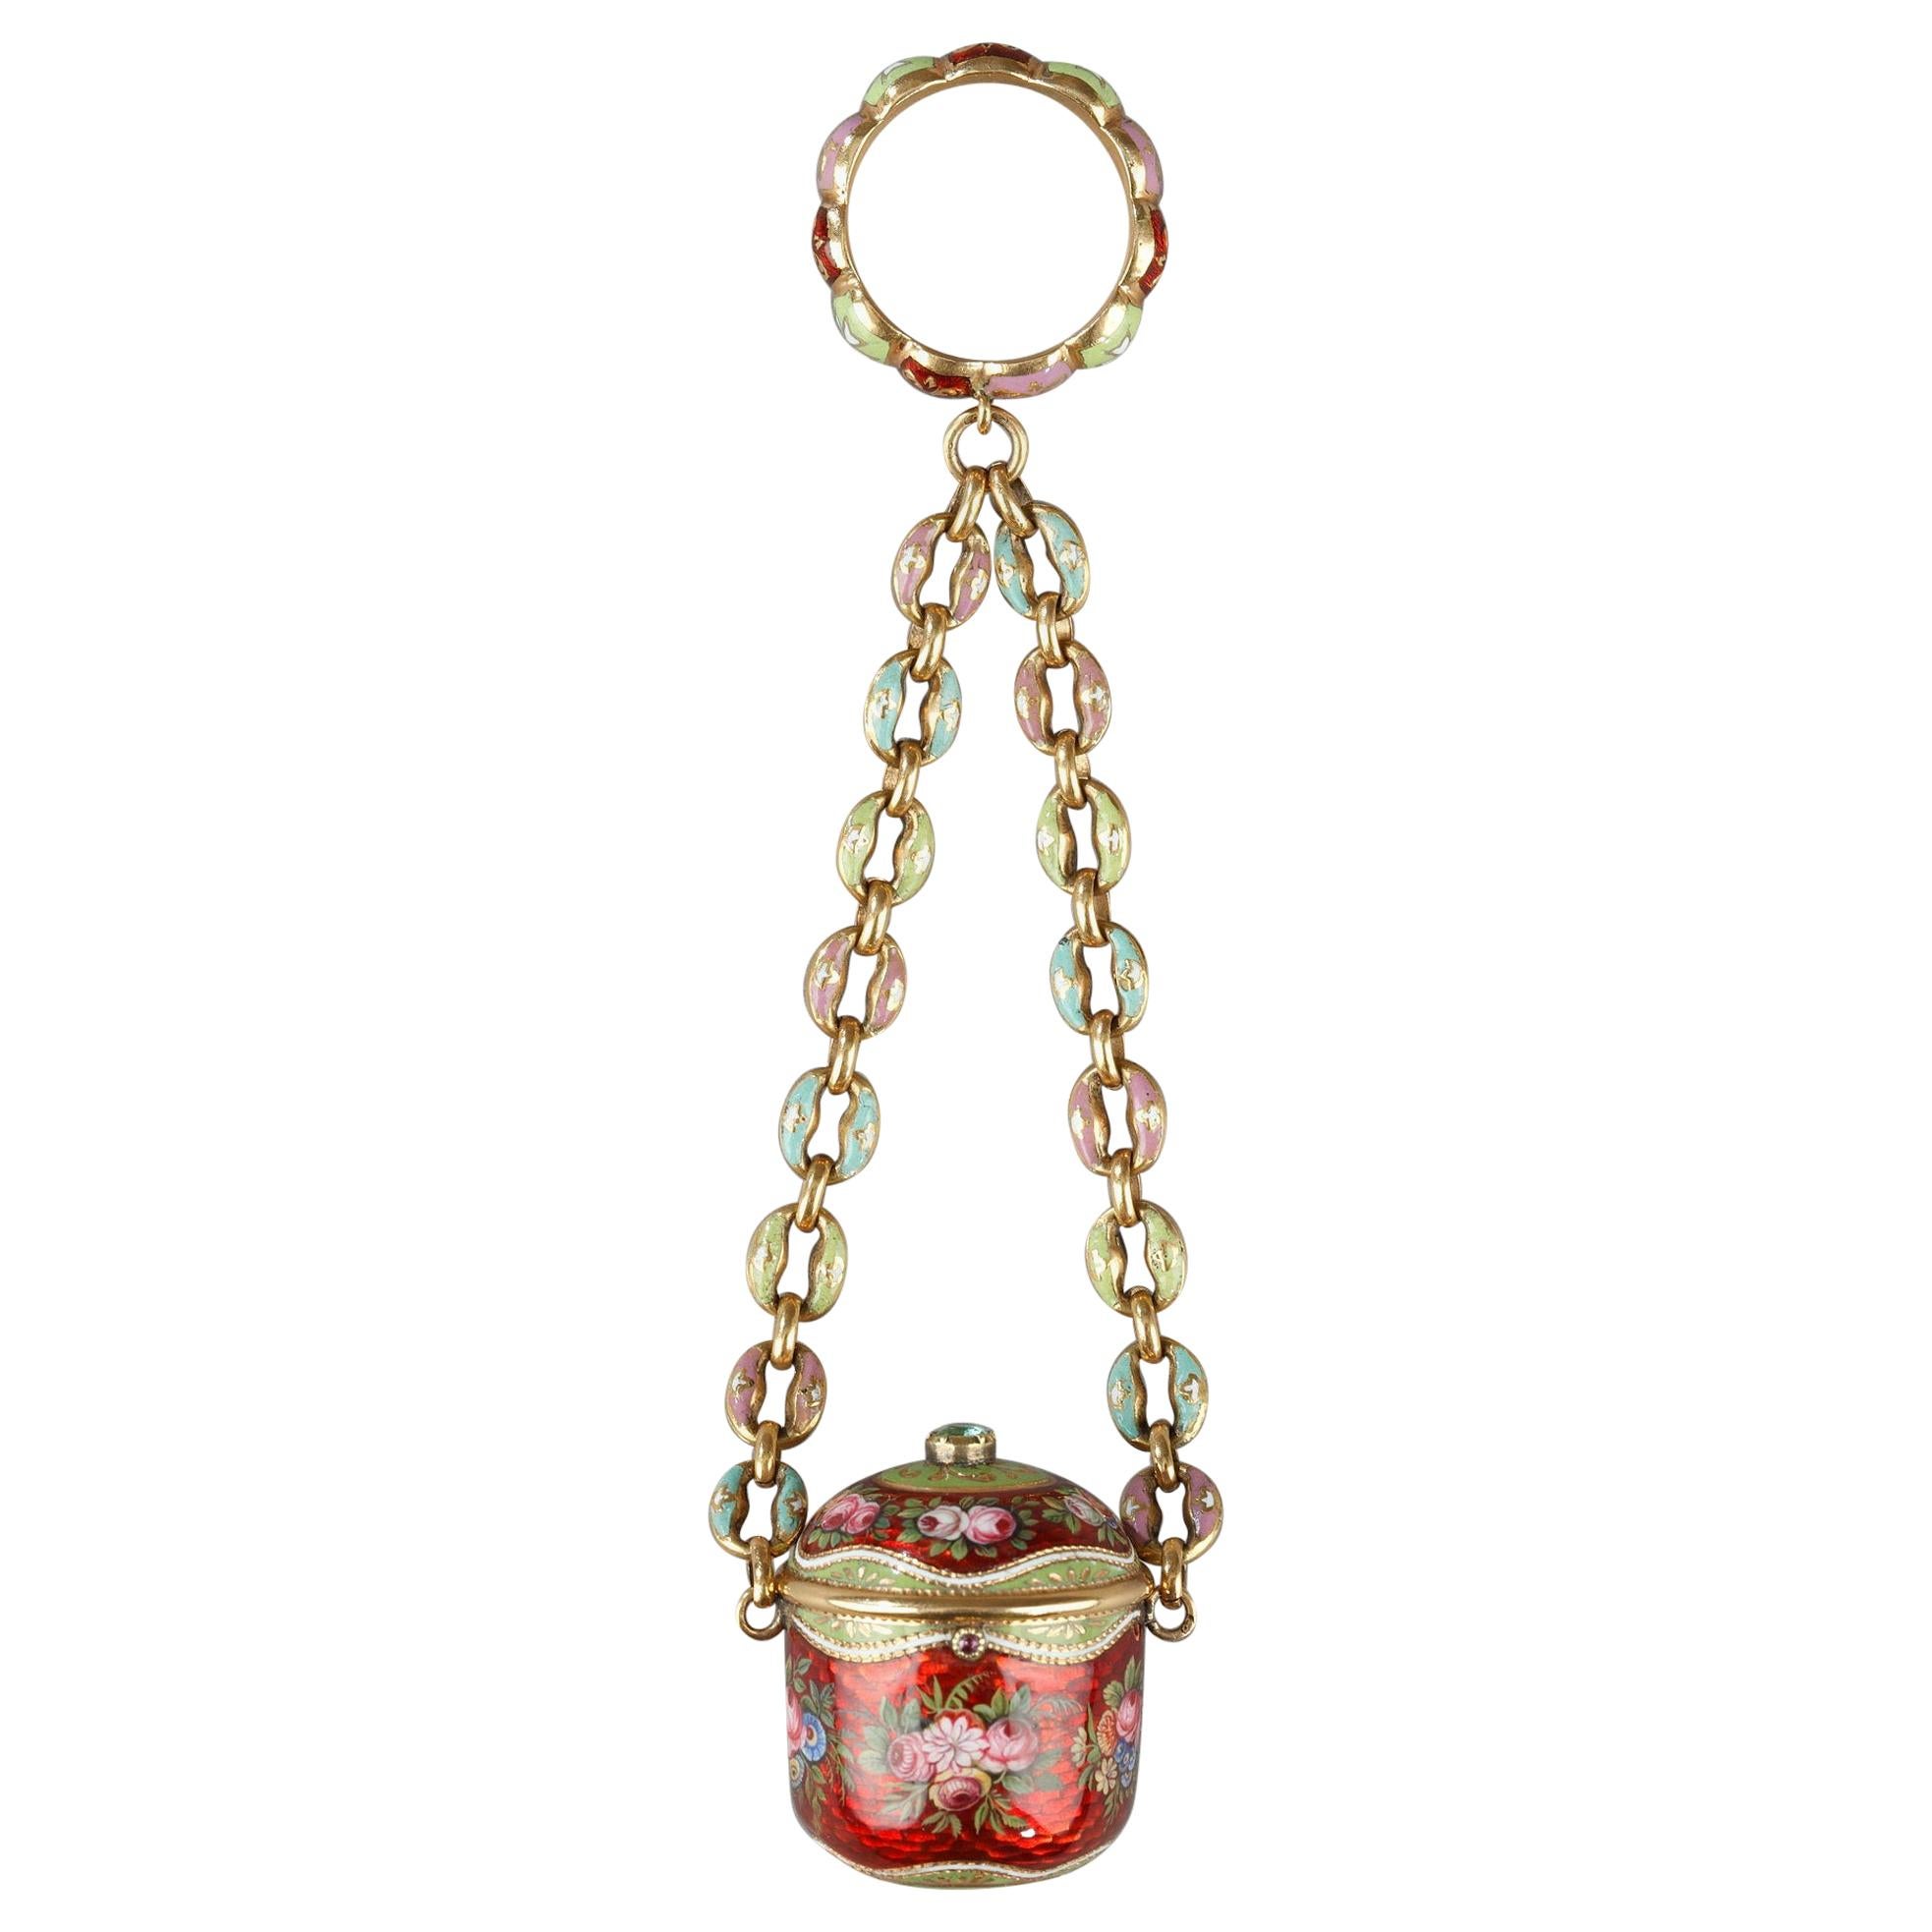 Early 19th Century Gold and Enamel Vinaigrette, Chain, and Ring, circa 1820